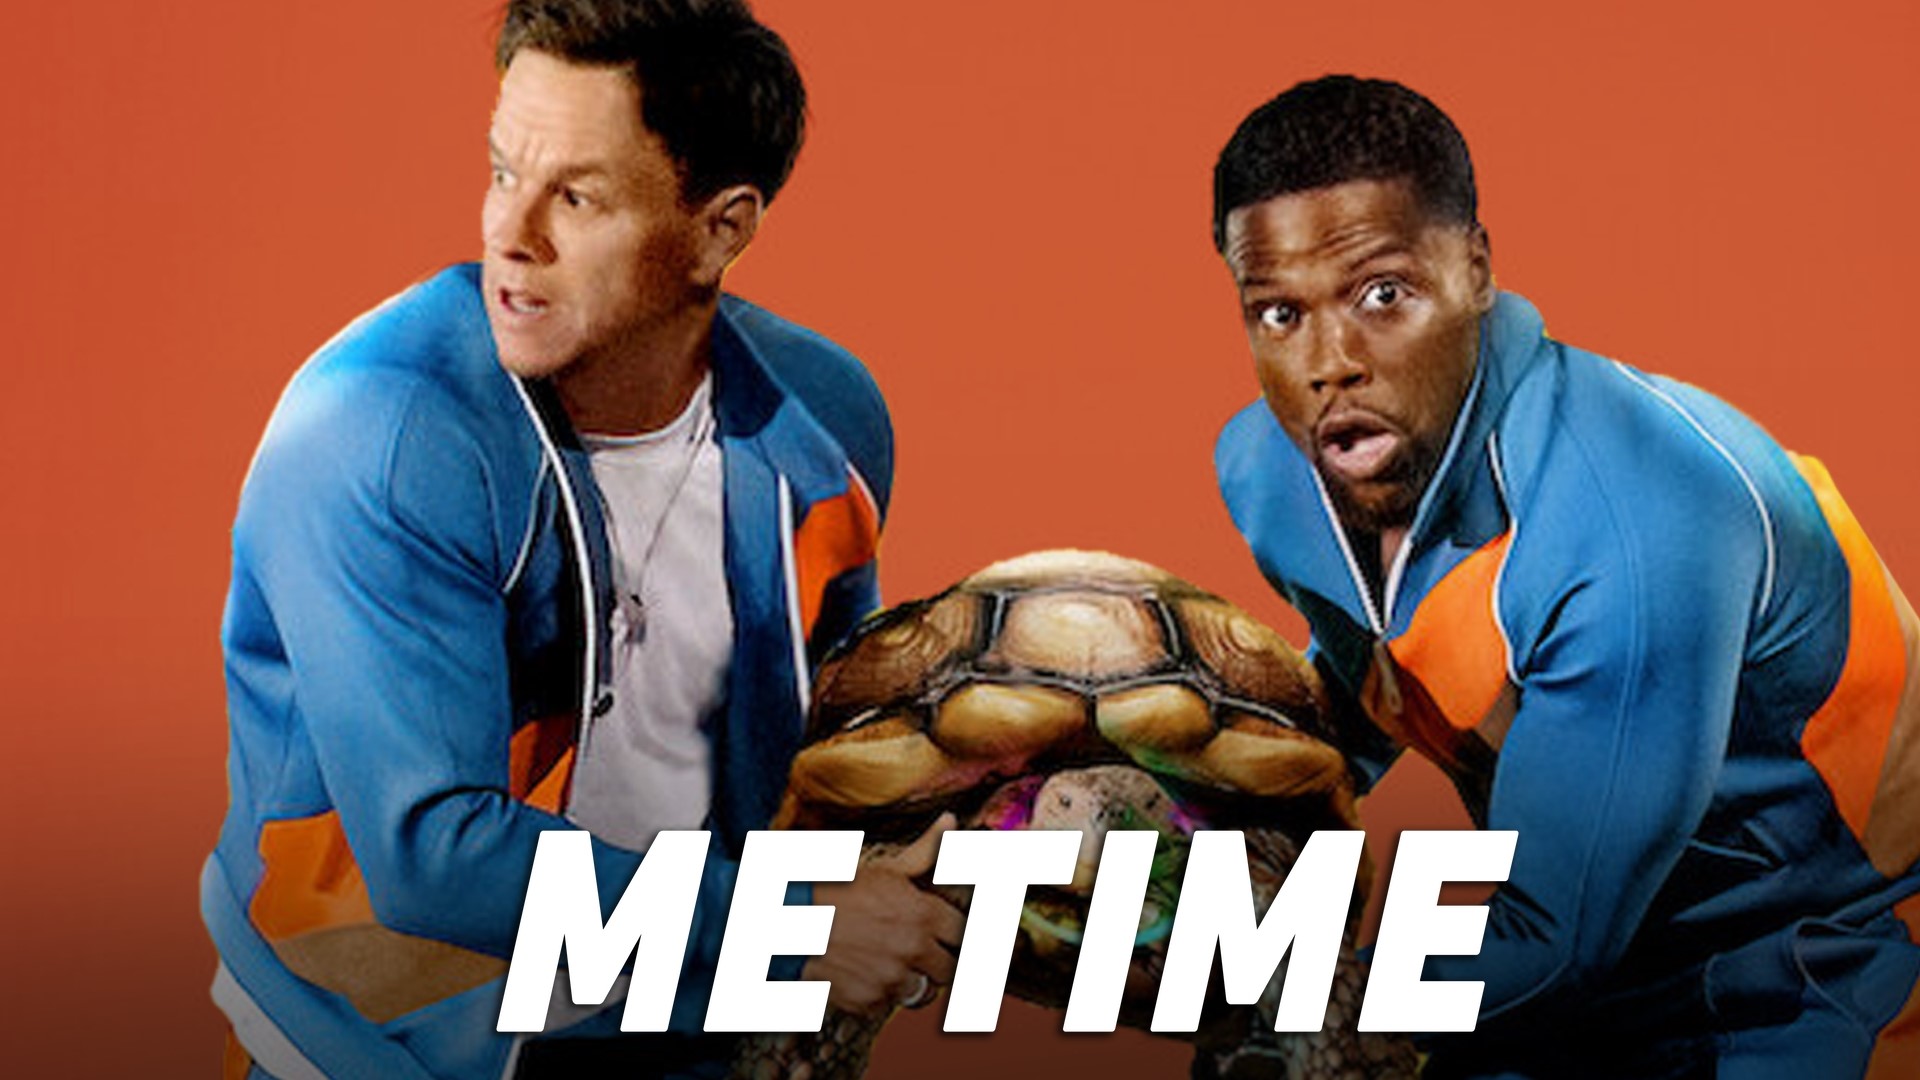 Me Time, the latest Netflix movie starring Mark Wahlberg and Kevin Hart, is a complete waste of time. The pacing is bad and the writing is even worse.